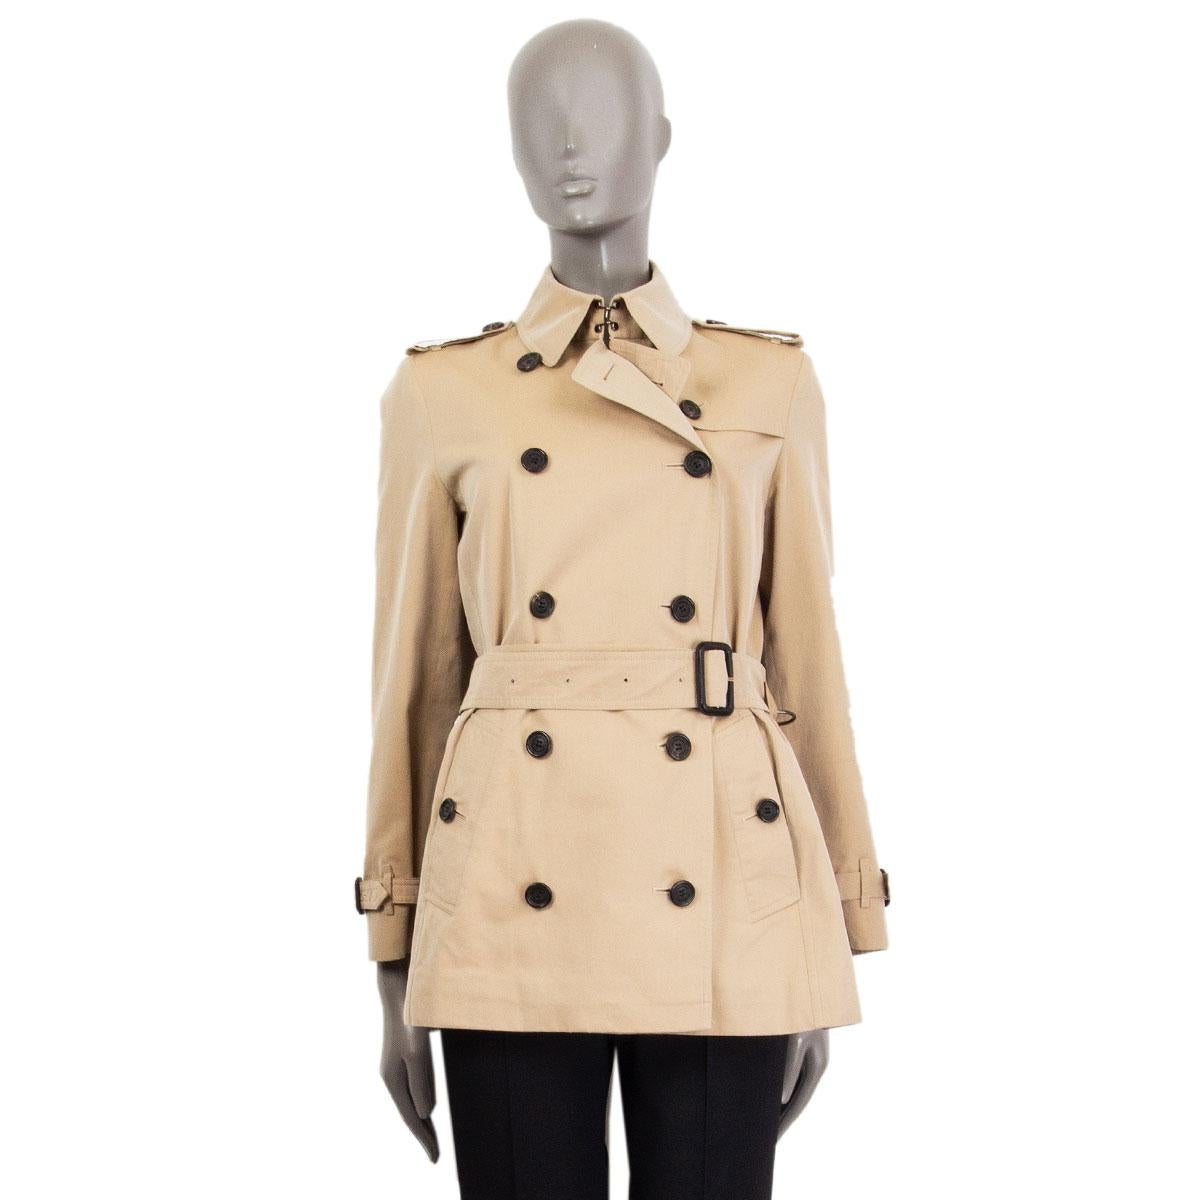 100% authentic Burberry London belted double-breasted trench jacket in beige cotton (100%) featuring two front pockets, waist belt, a gun flap and épaulettes. Lined in the classic Burberry tartan. Has been worn and is in excellent condition.